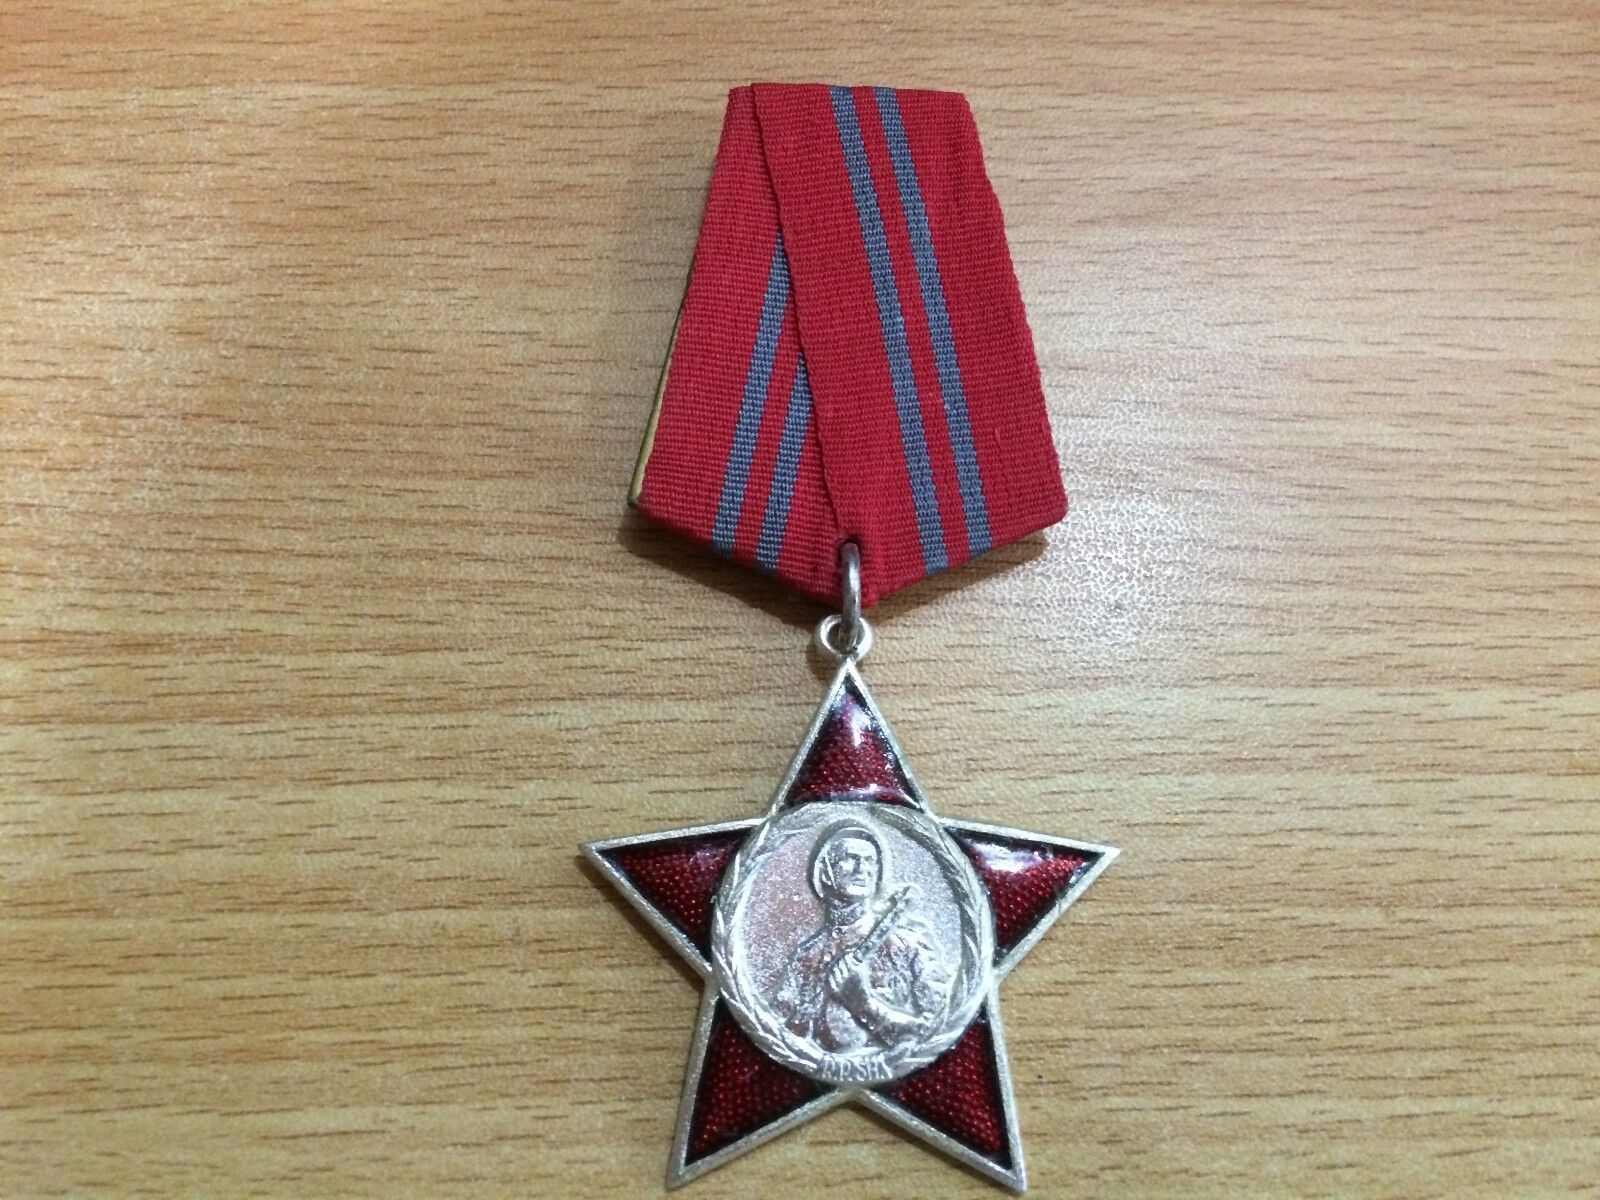 ALBANIA RED STAR ORDER 2 CLASS MEDALS & ORDERS ALBANIAN SOCIALIST REALISM